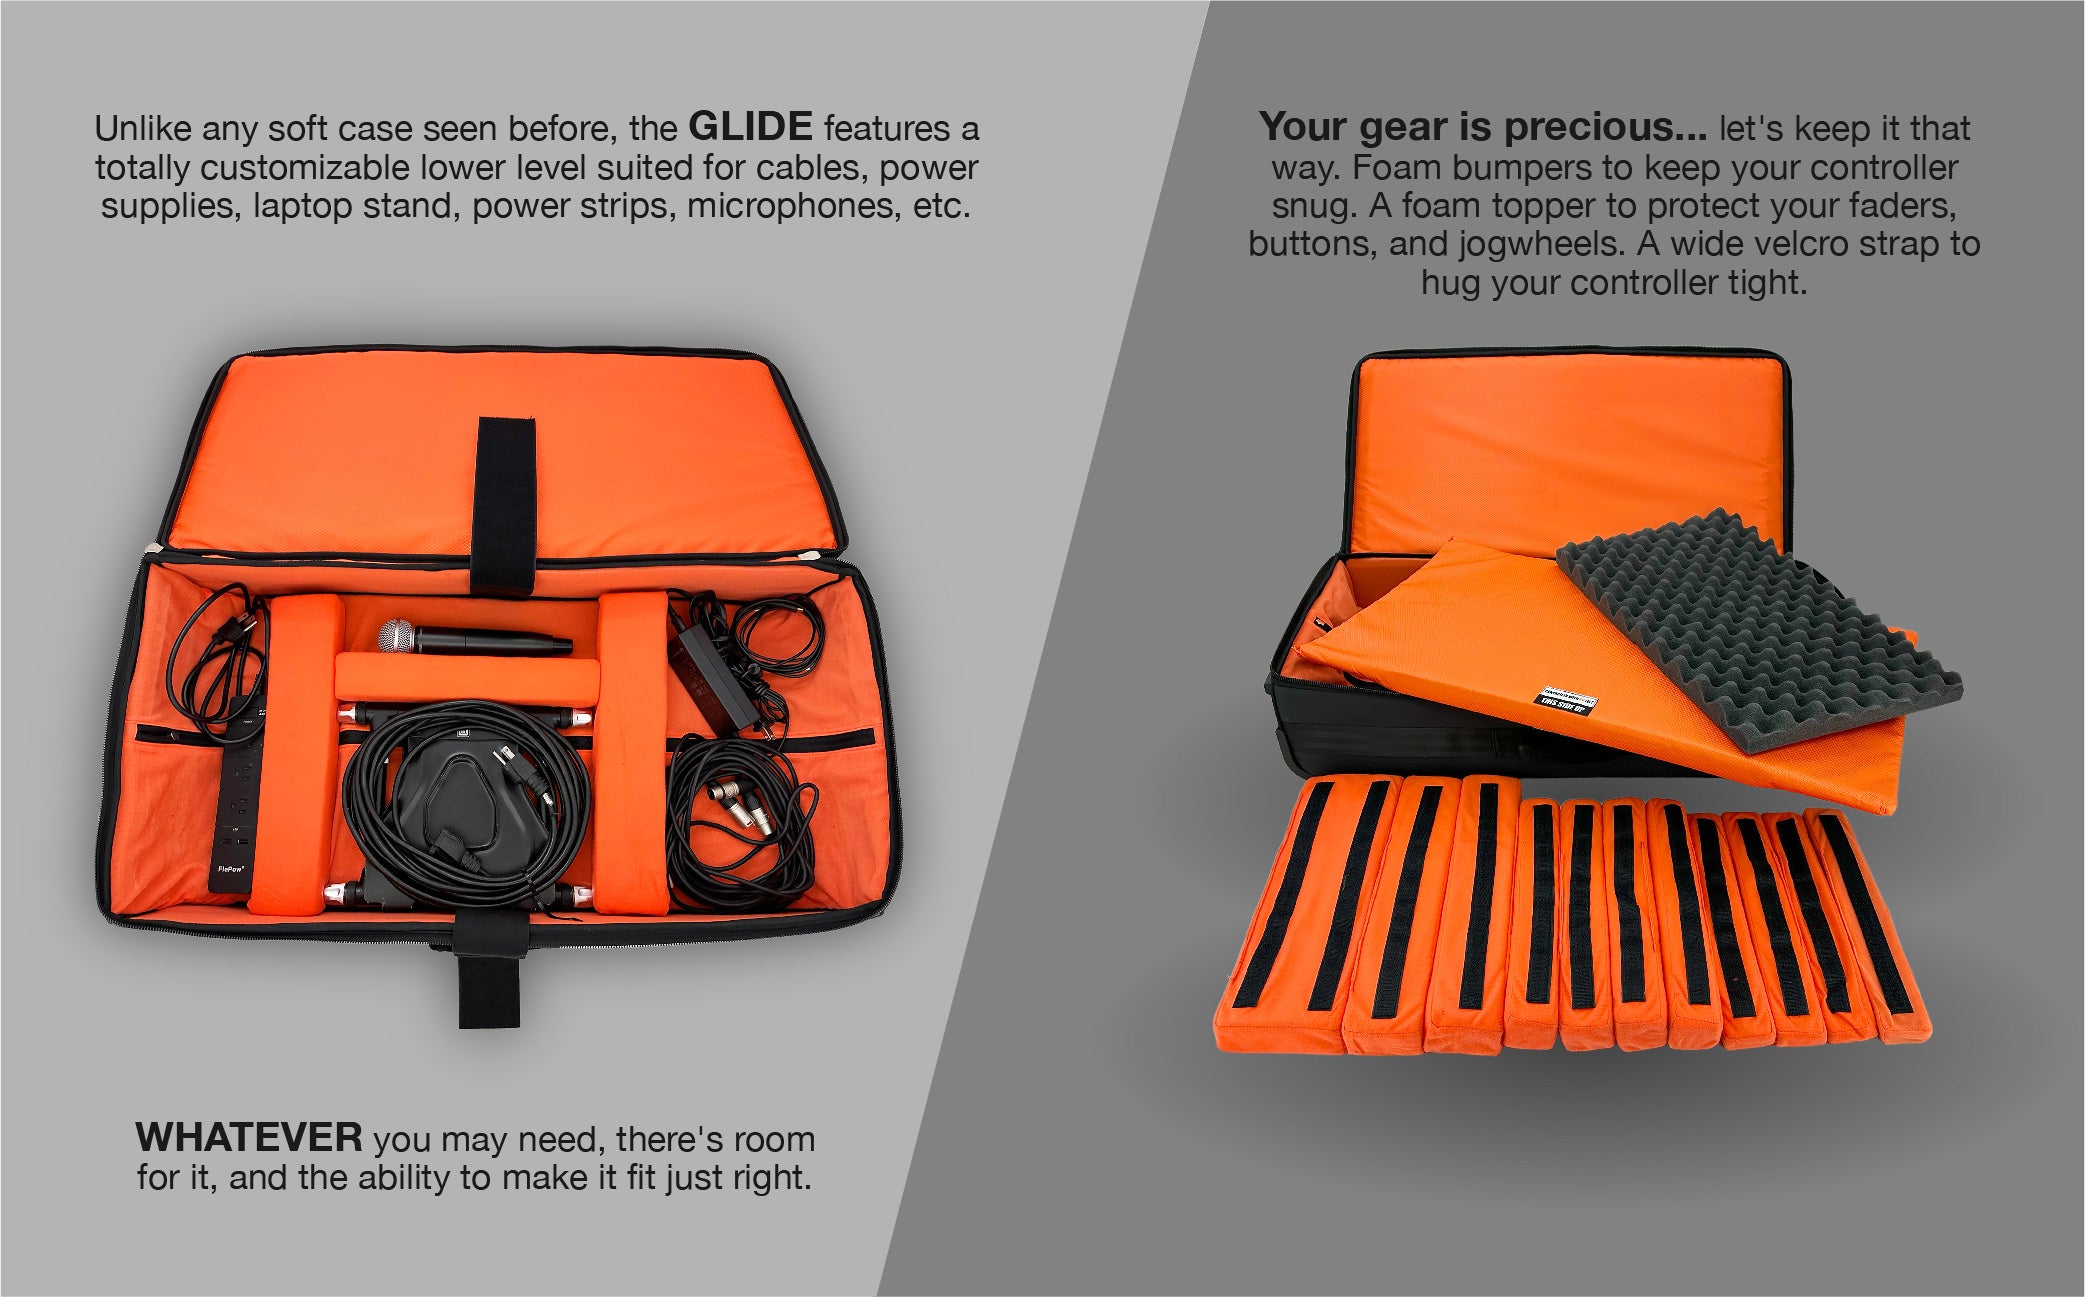 Unlike any soft case seen before, the GLIDE features a totally customizable lower level suited for cables, power supplies, laptop stand, power strips, microphones, etc. WHATEVER you may need, there's room for it, and the ability to make it fit just right.